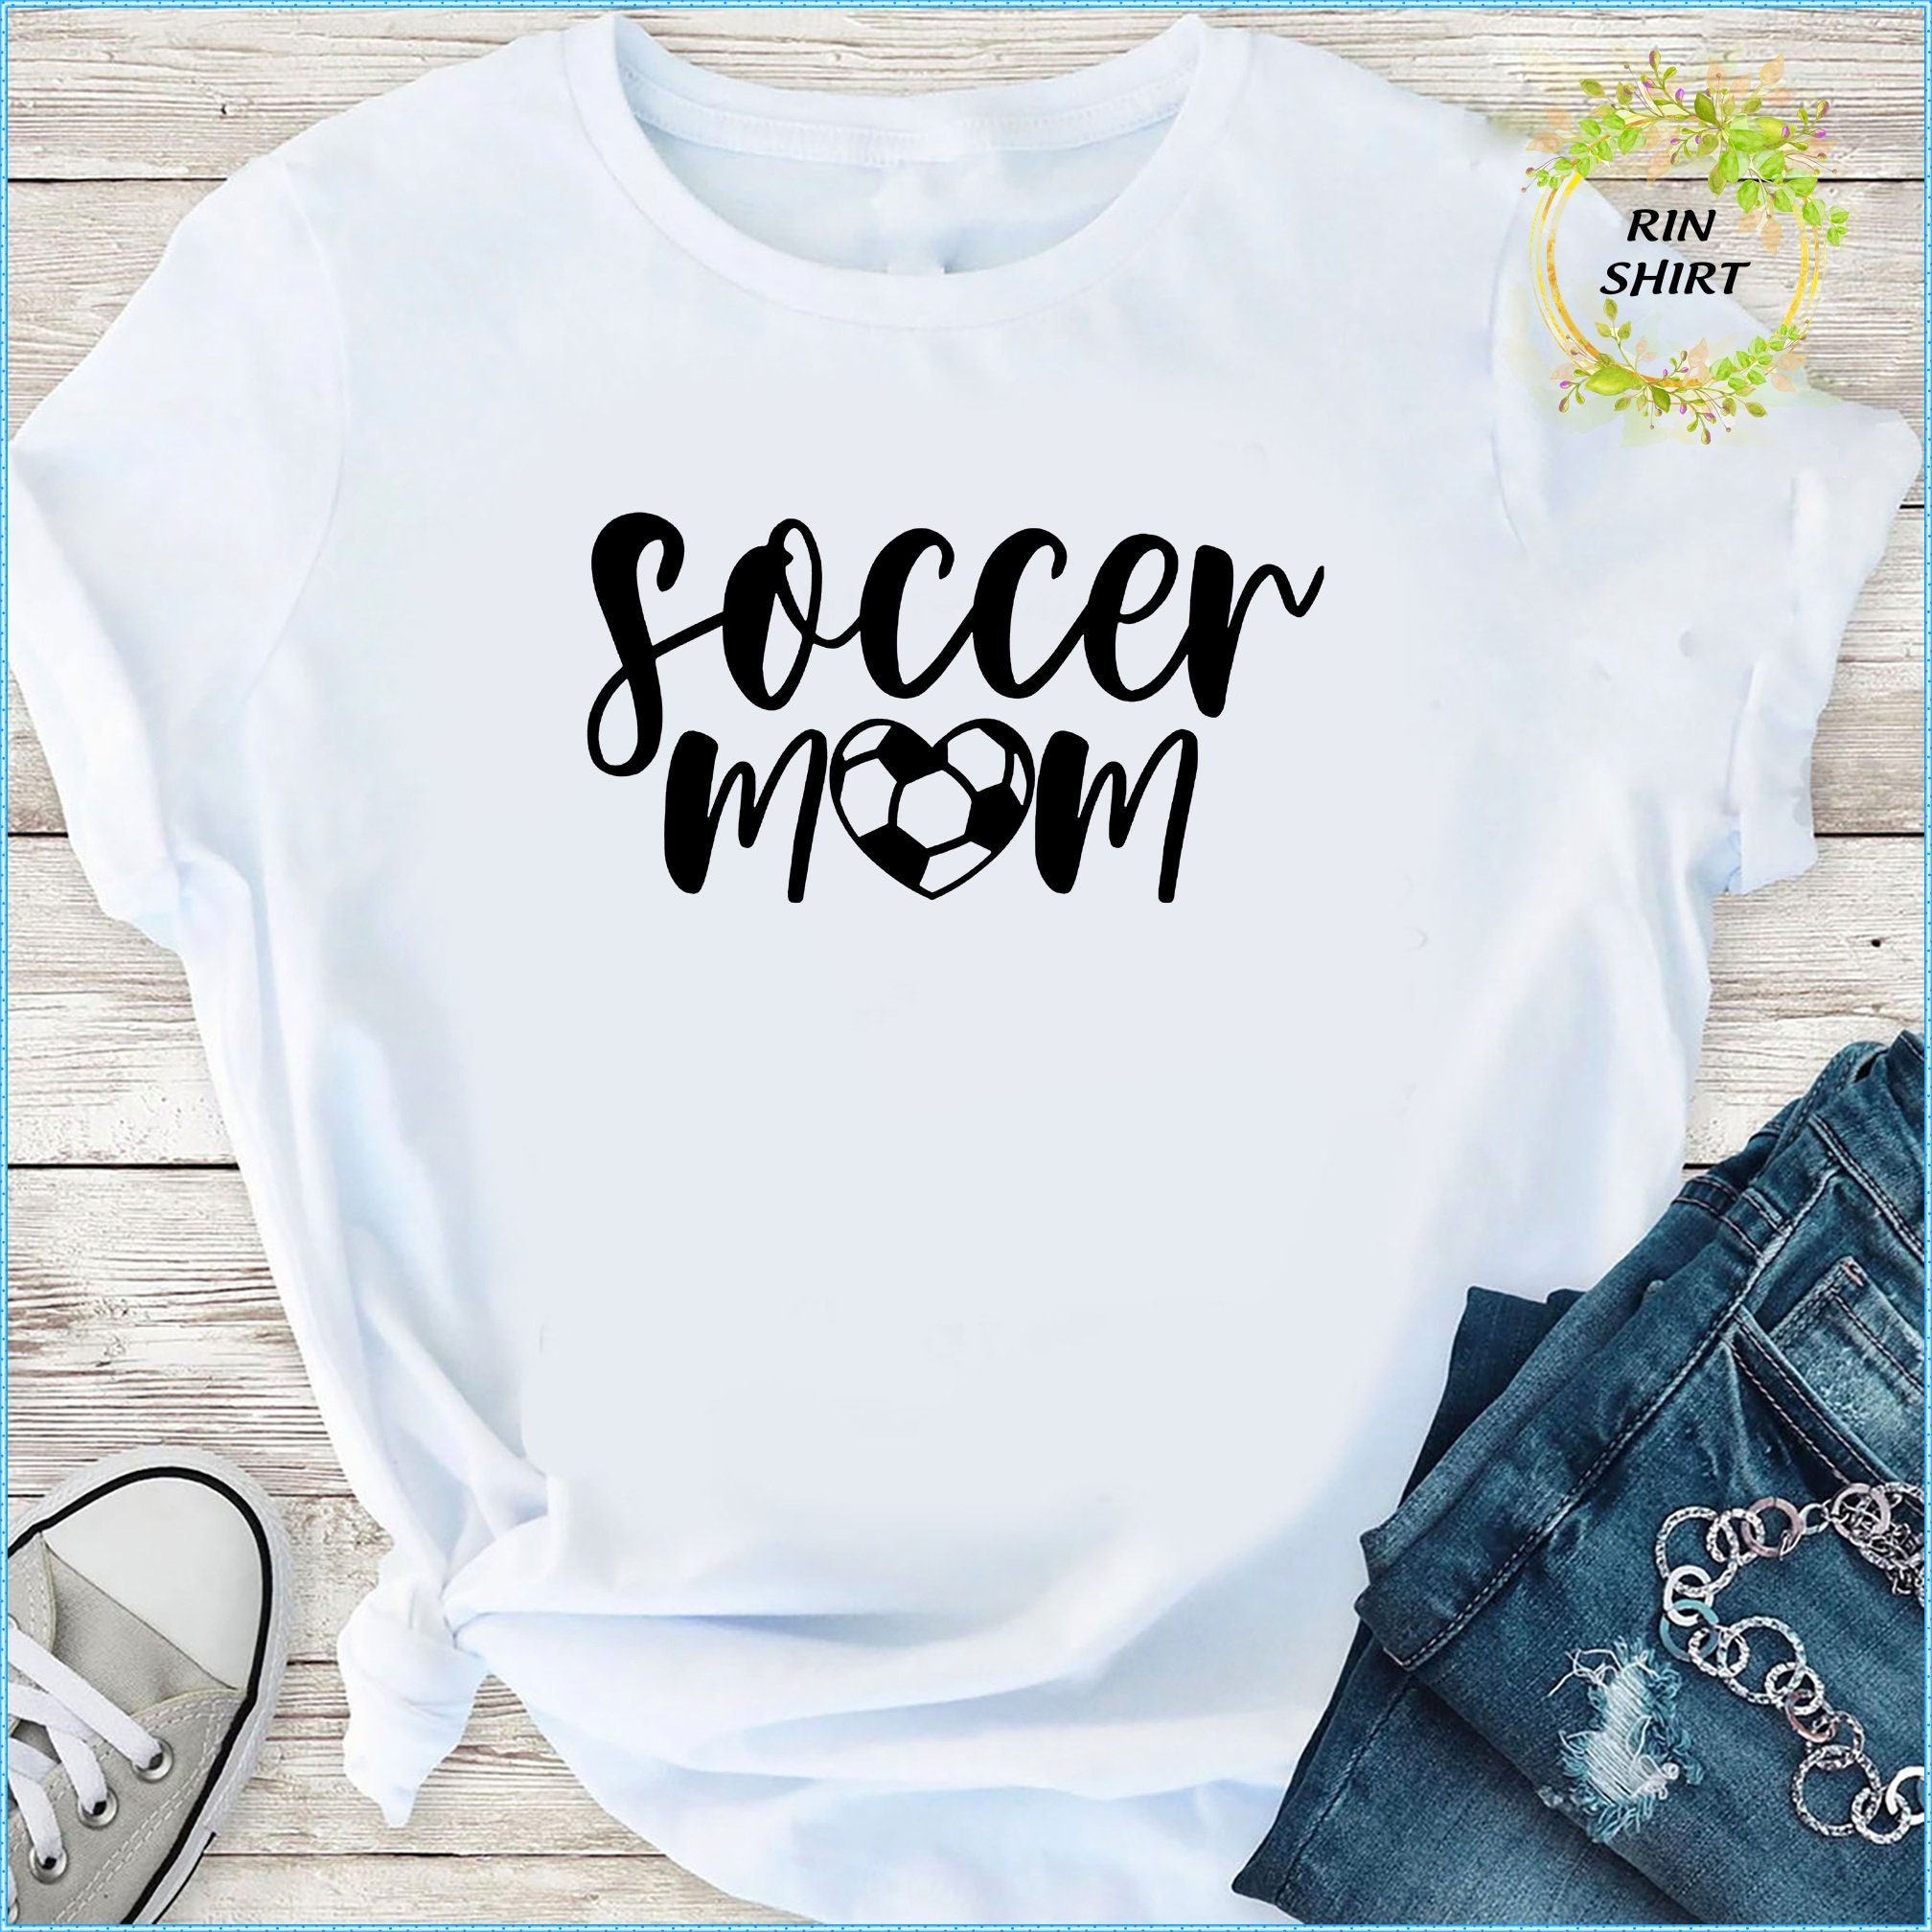 Hot Soccer Mom Shirt Gifts for Mom Birthday Gifts for Her E image picture